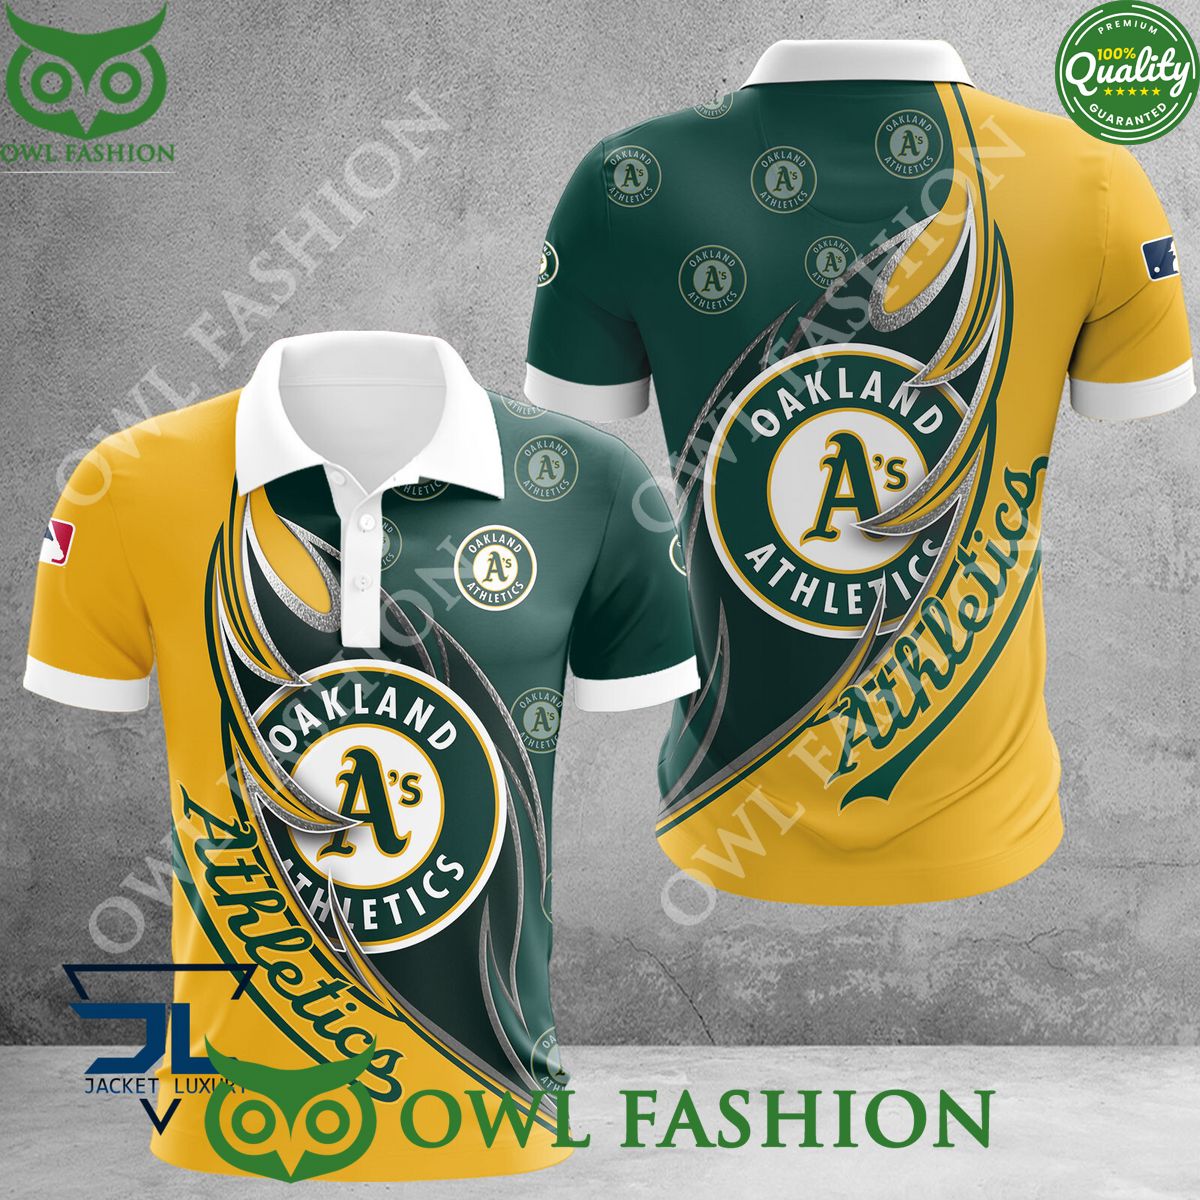 MLB Champion Oakland Athletics Hoodie Shirt You look so healthy and fit